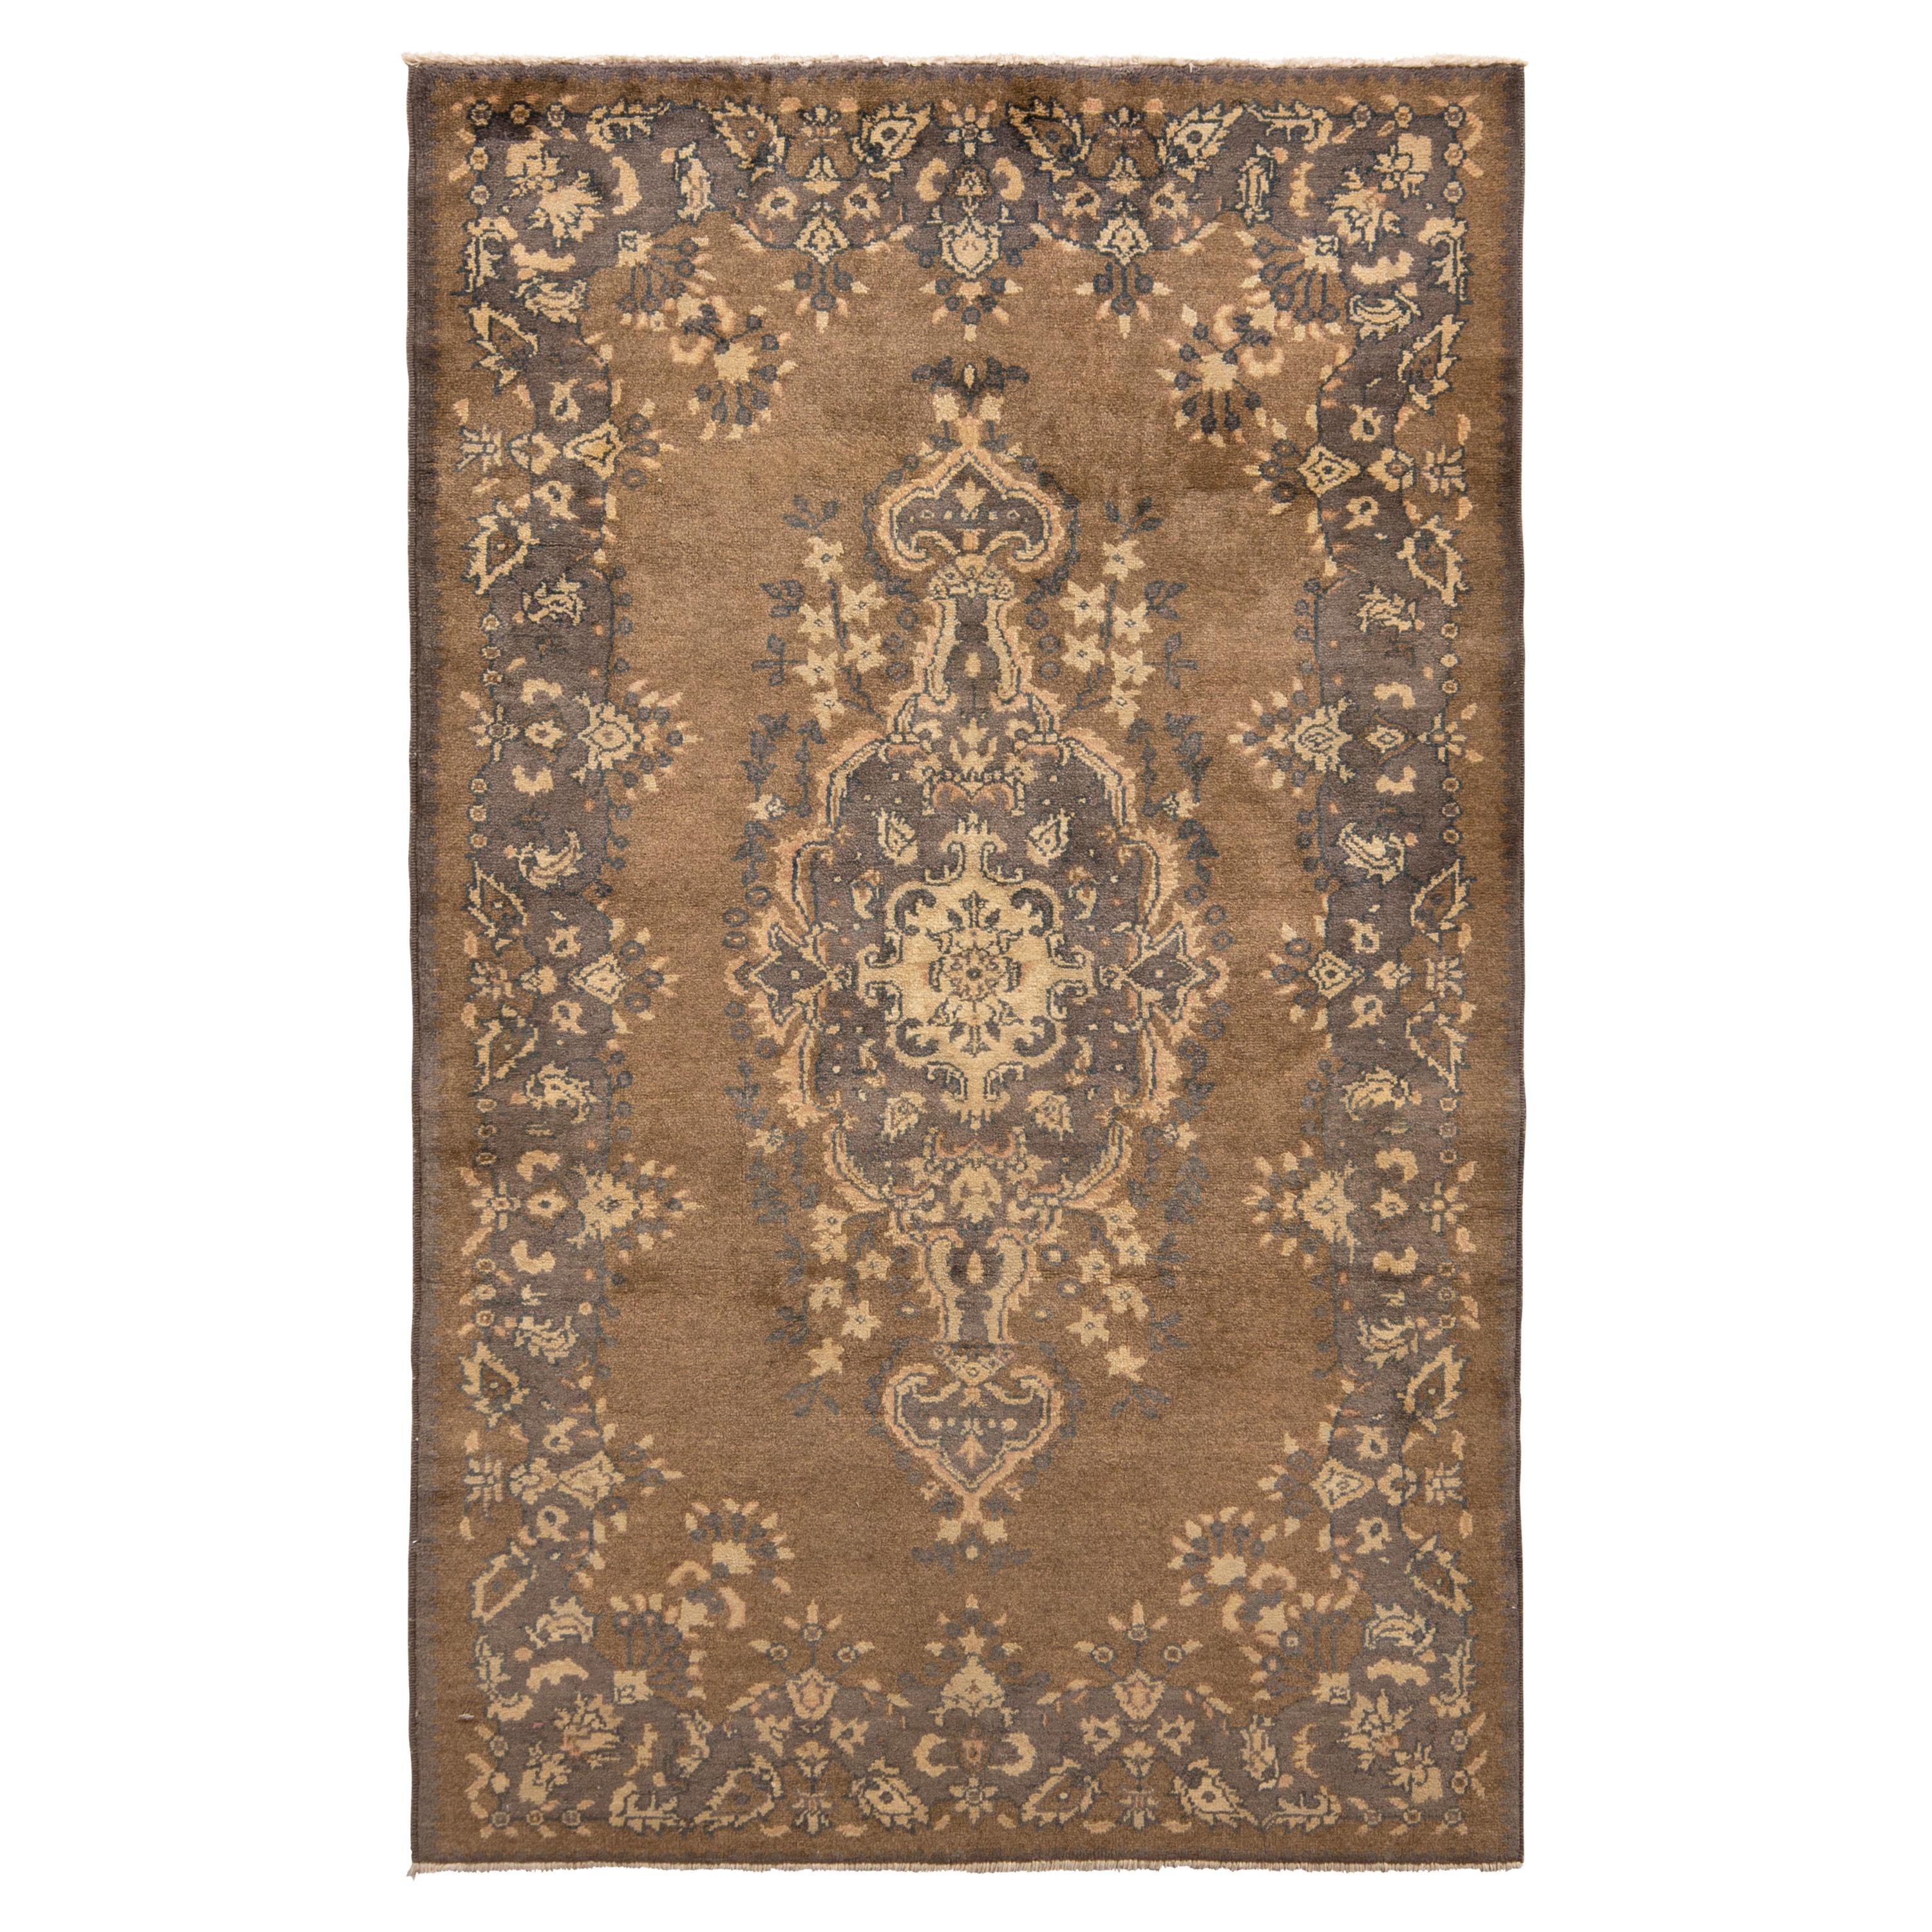 Hand-Knotted Vintage Sivas Rug in Beige-Brown with Medallion Floral Pattern